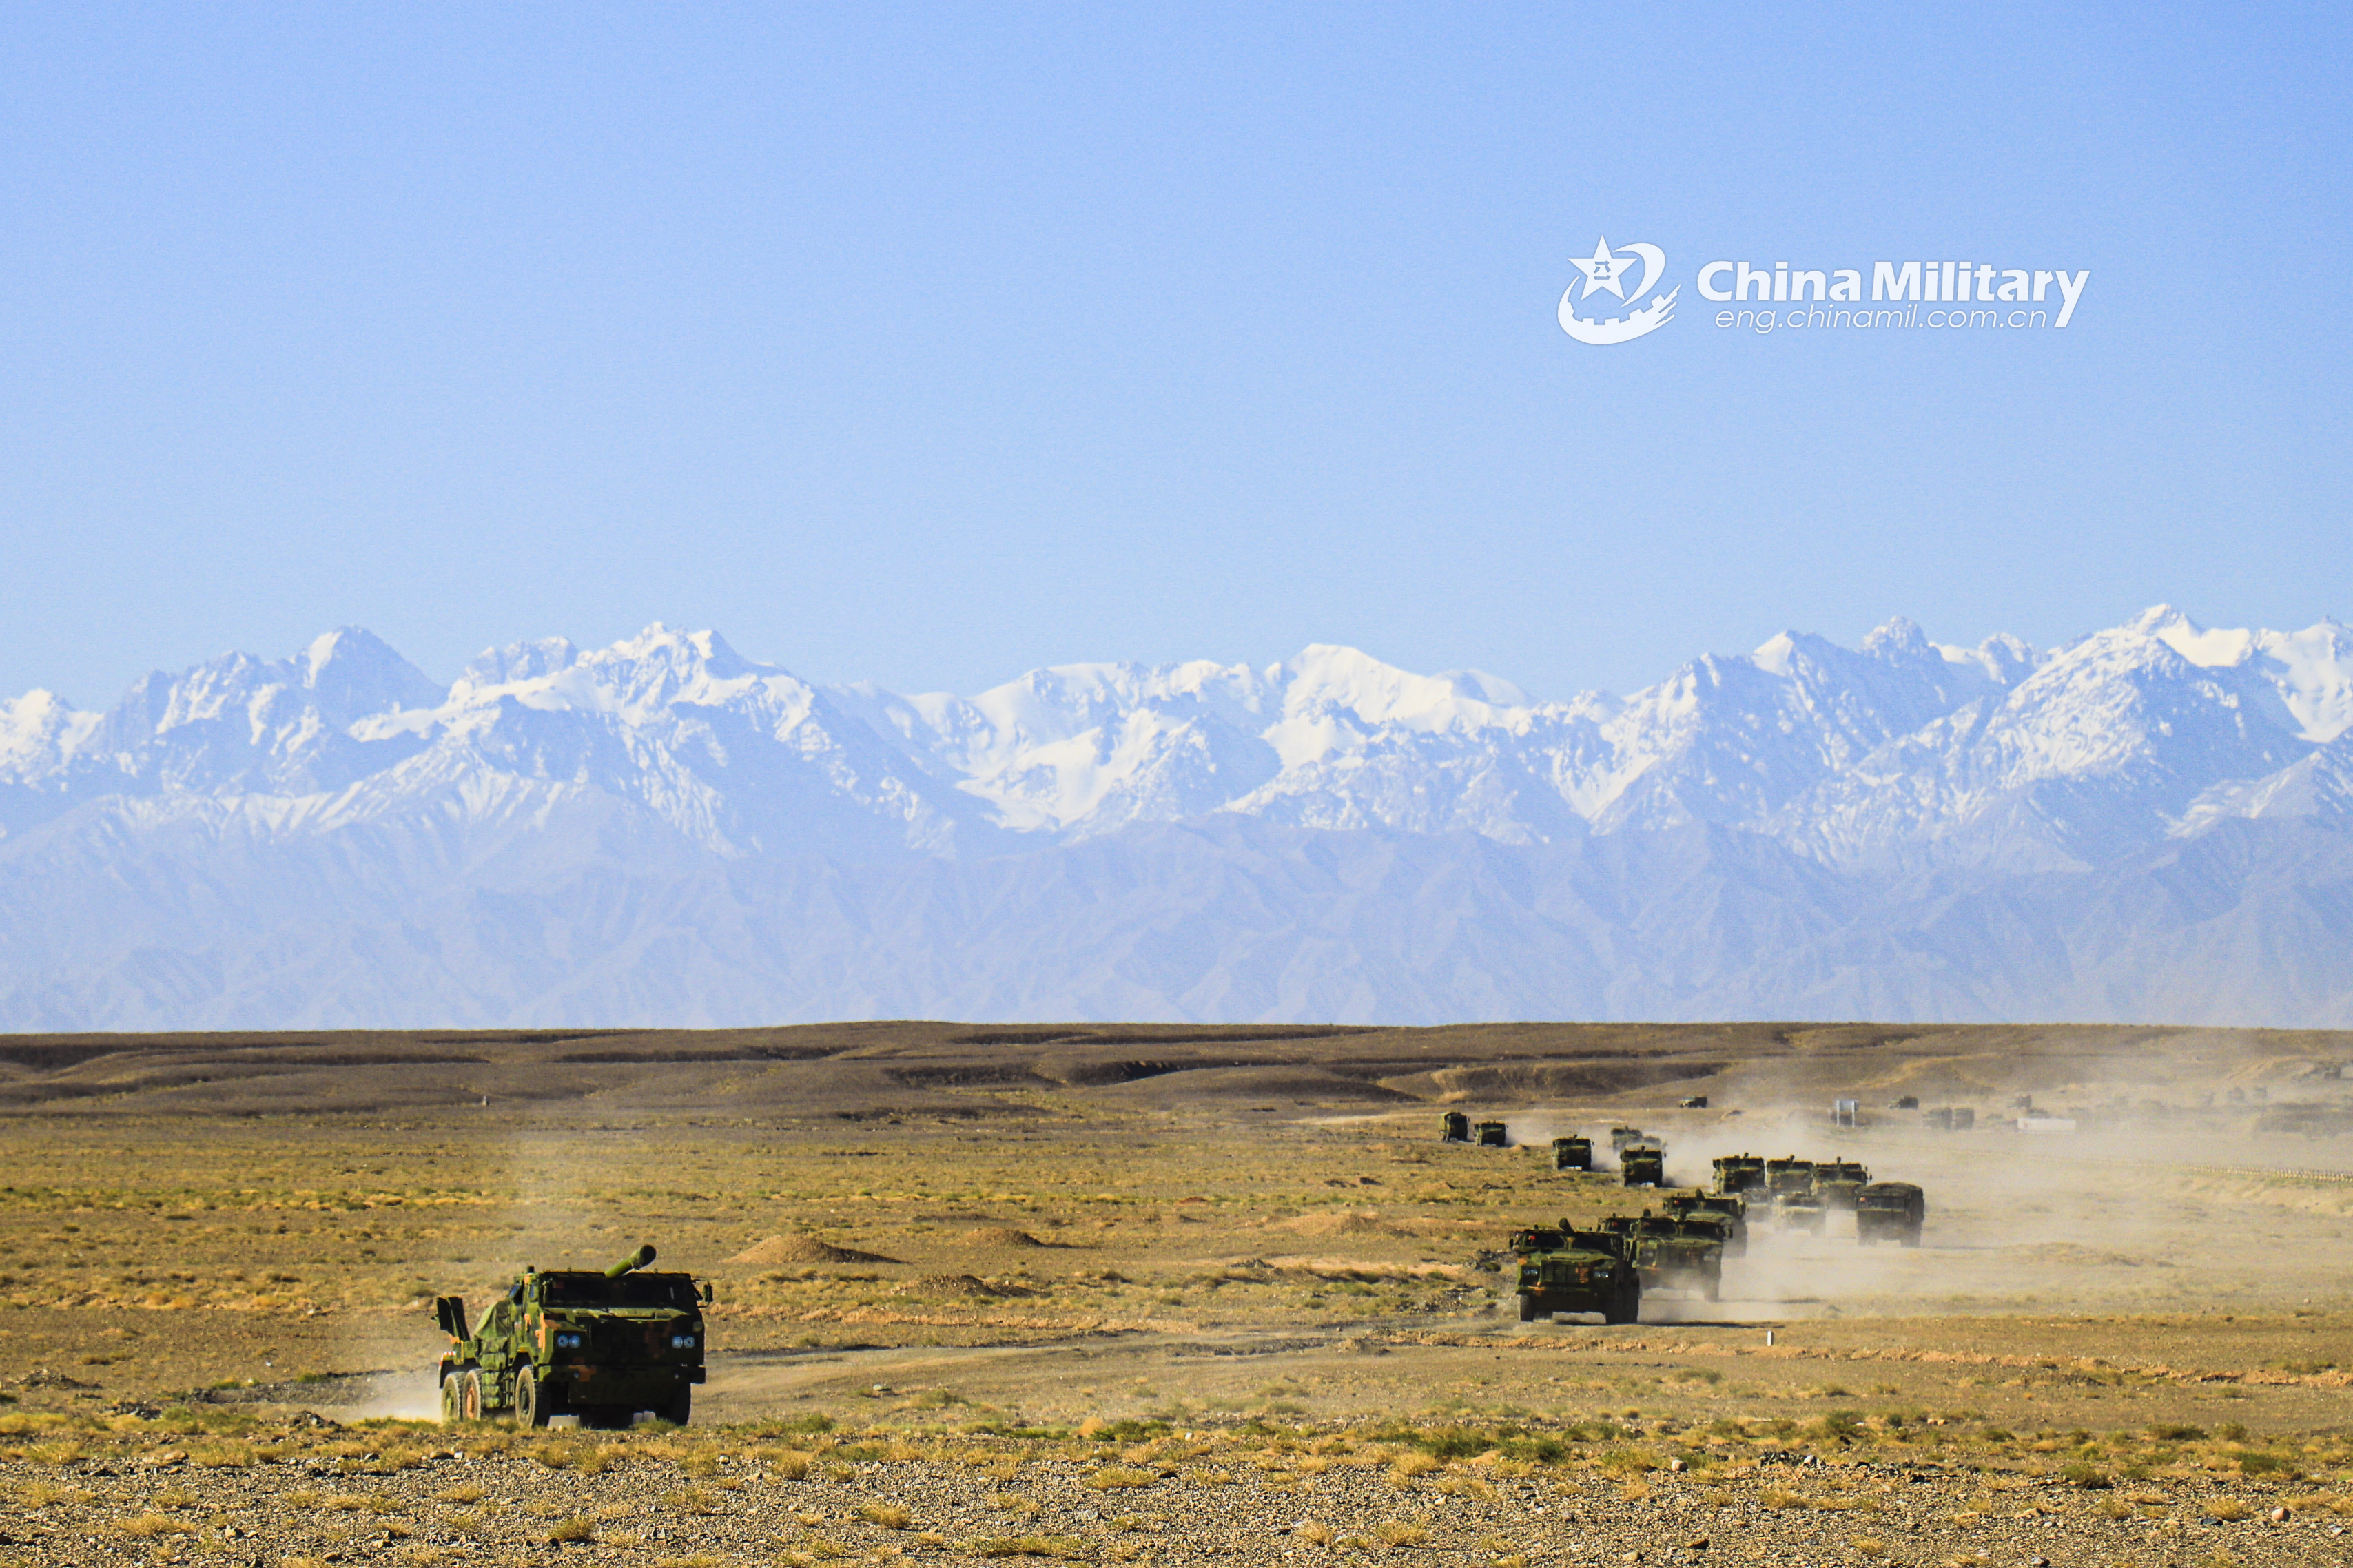 Chinese People's Liberation Army Deploys Howitzers in China's Gobi Desert